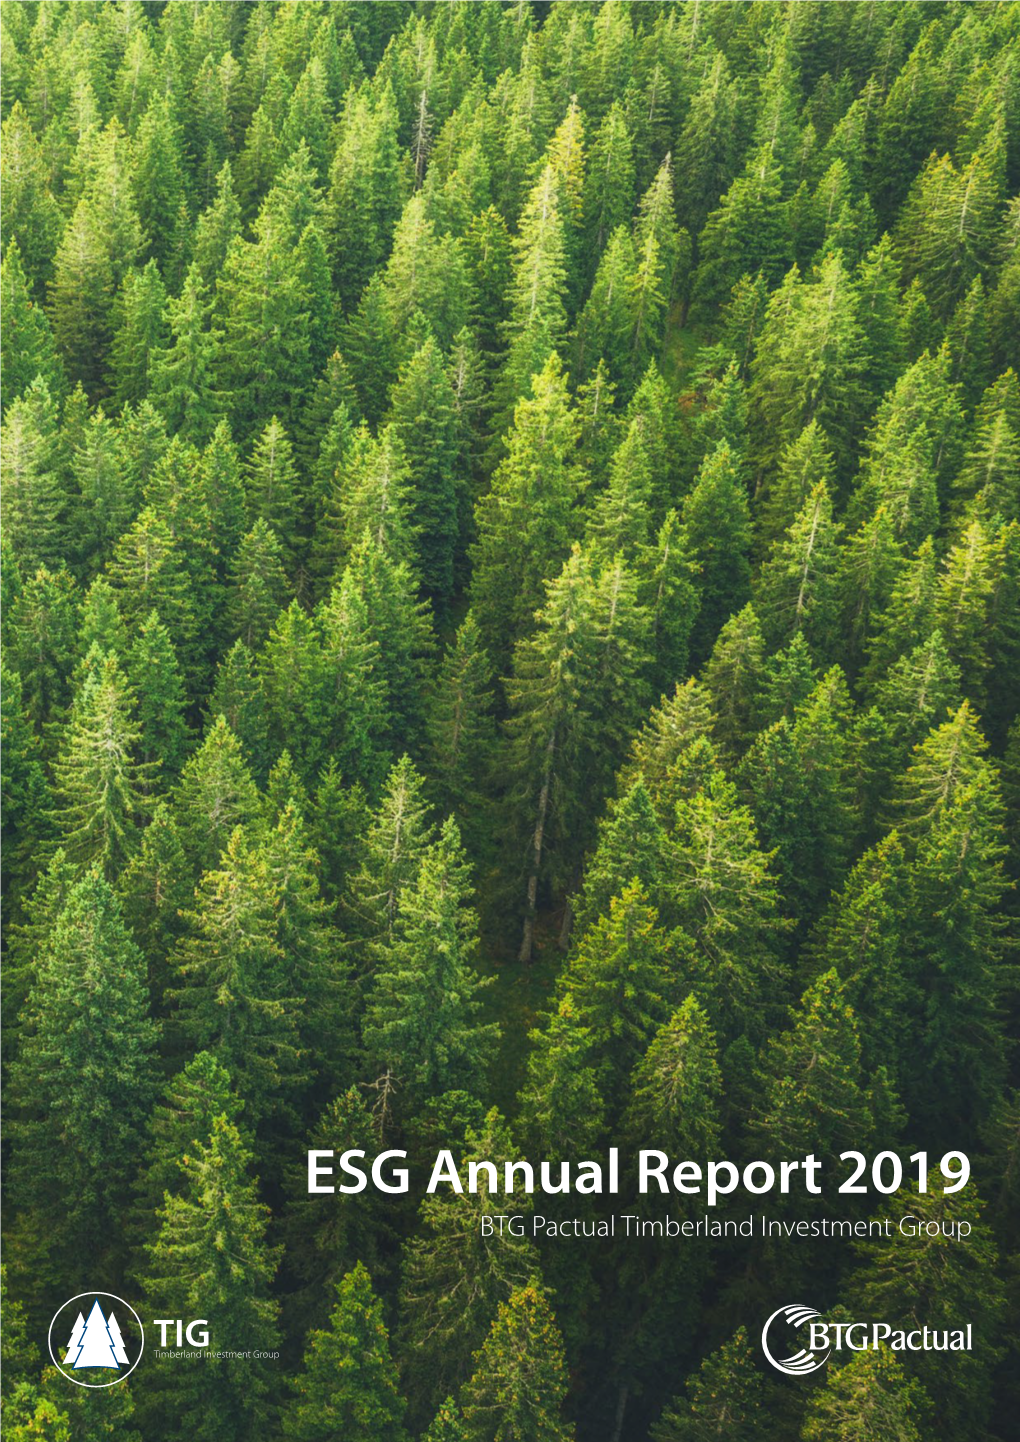 ESG Annual Report 2019 BTG Pactual Timberland Investment Group